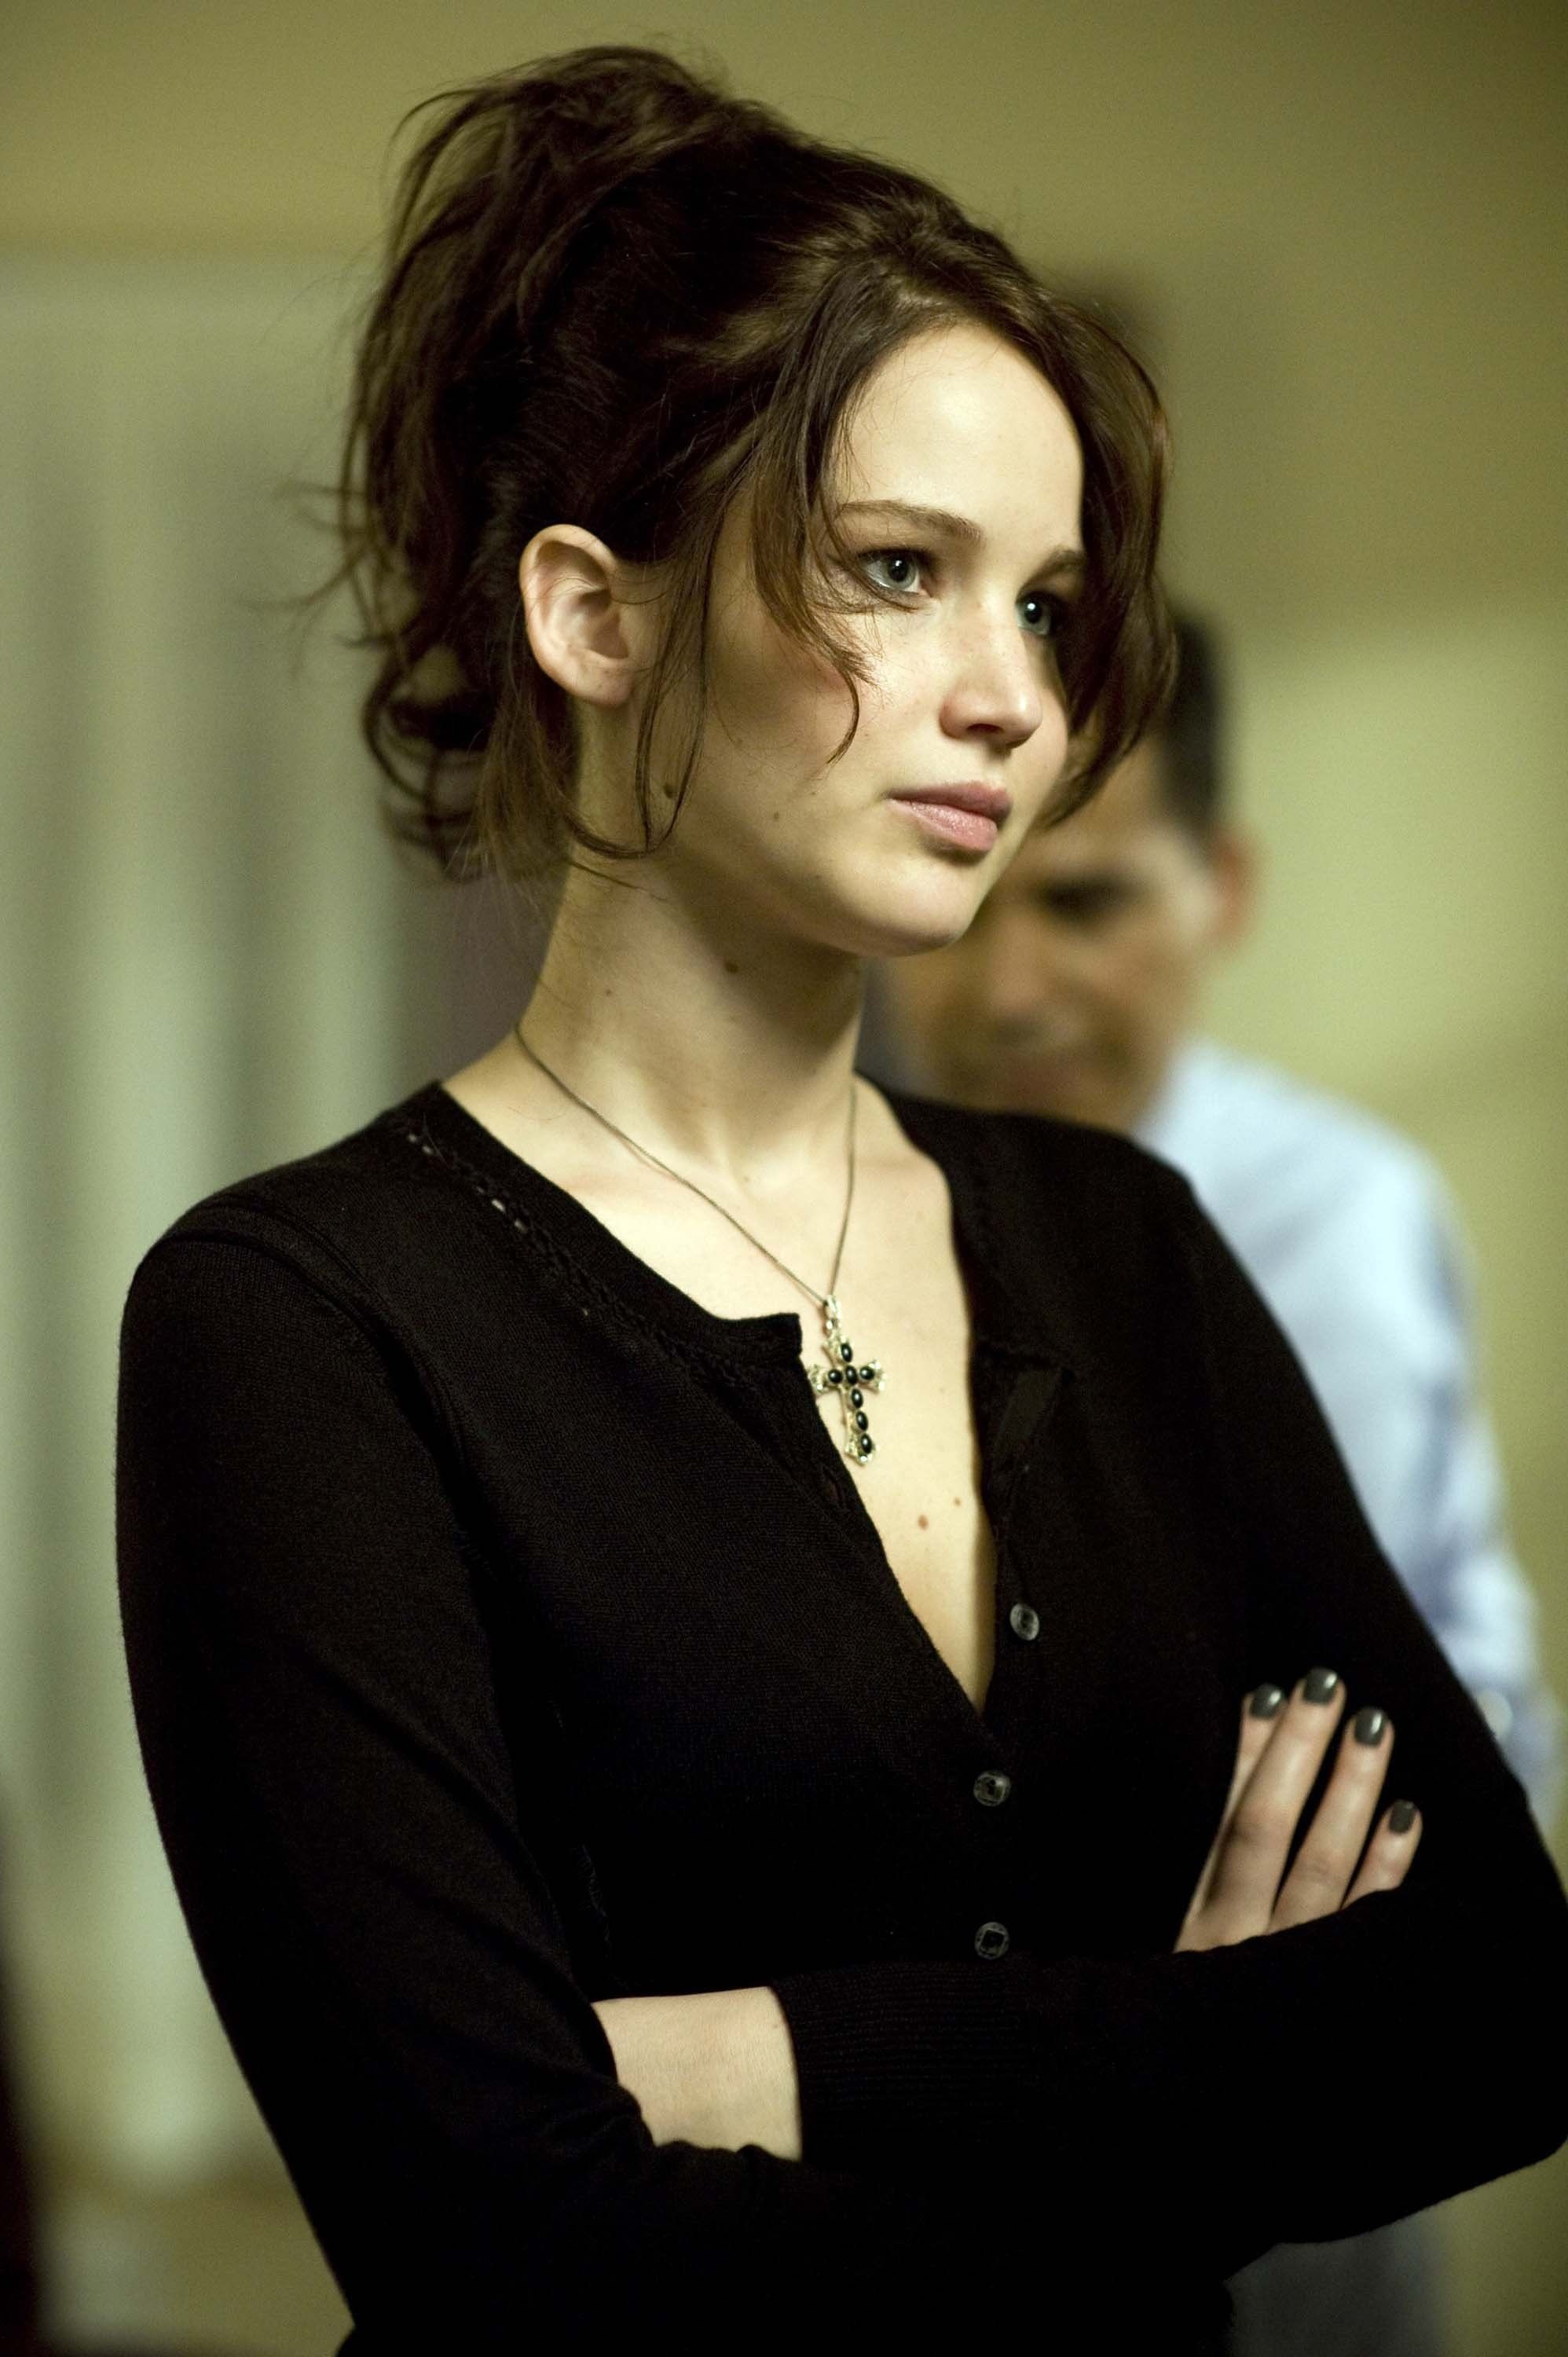 Silver Linings Playbook, Silver lining, Good movies, Ideas, 2000x3000 HD Handy